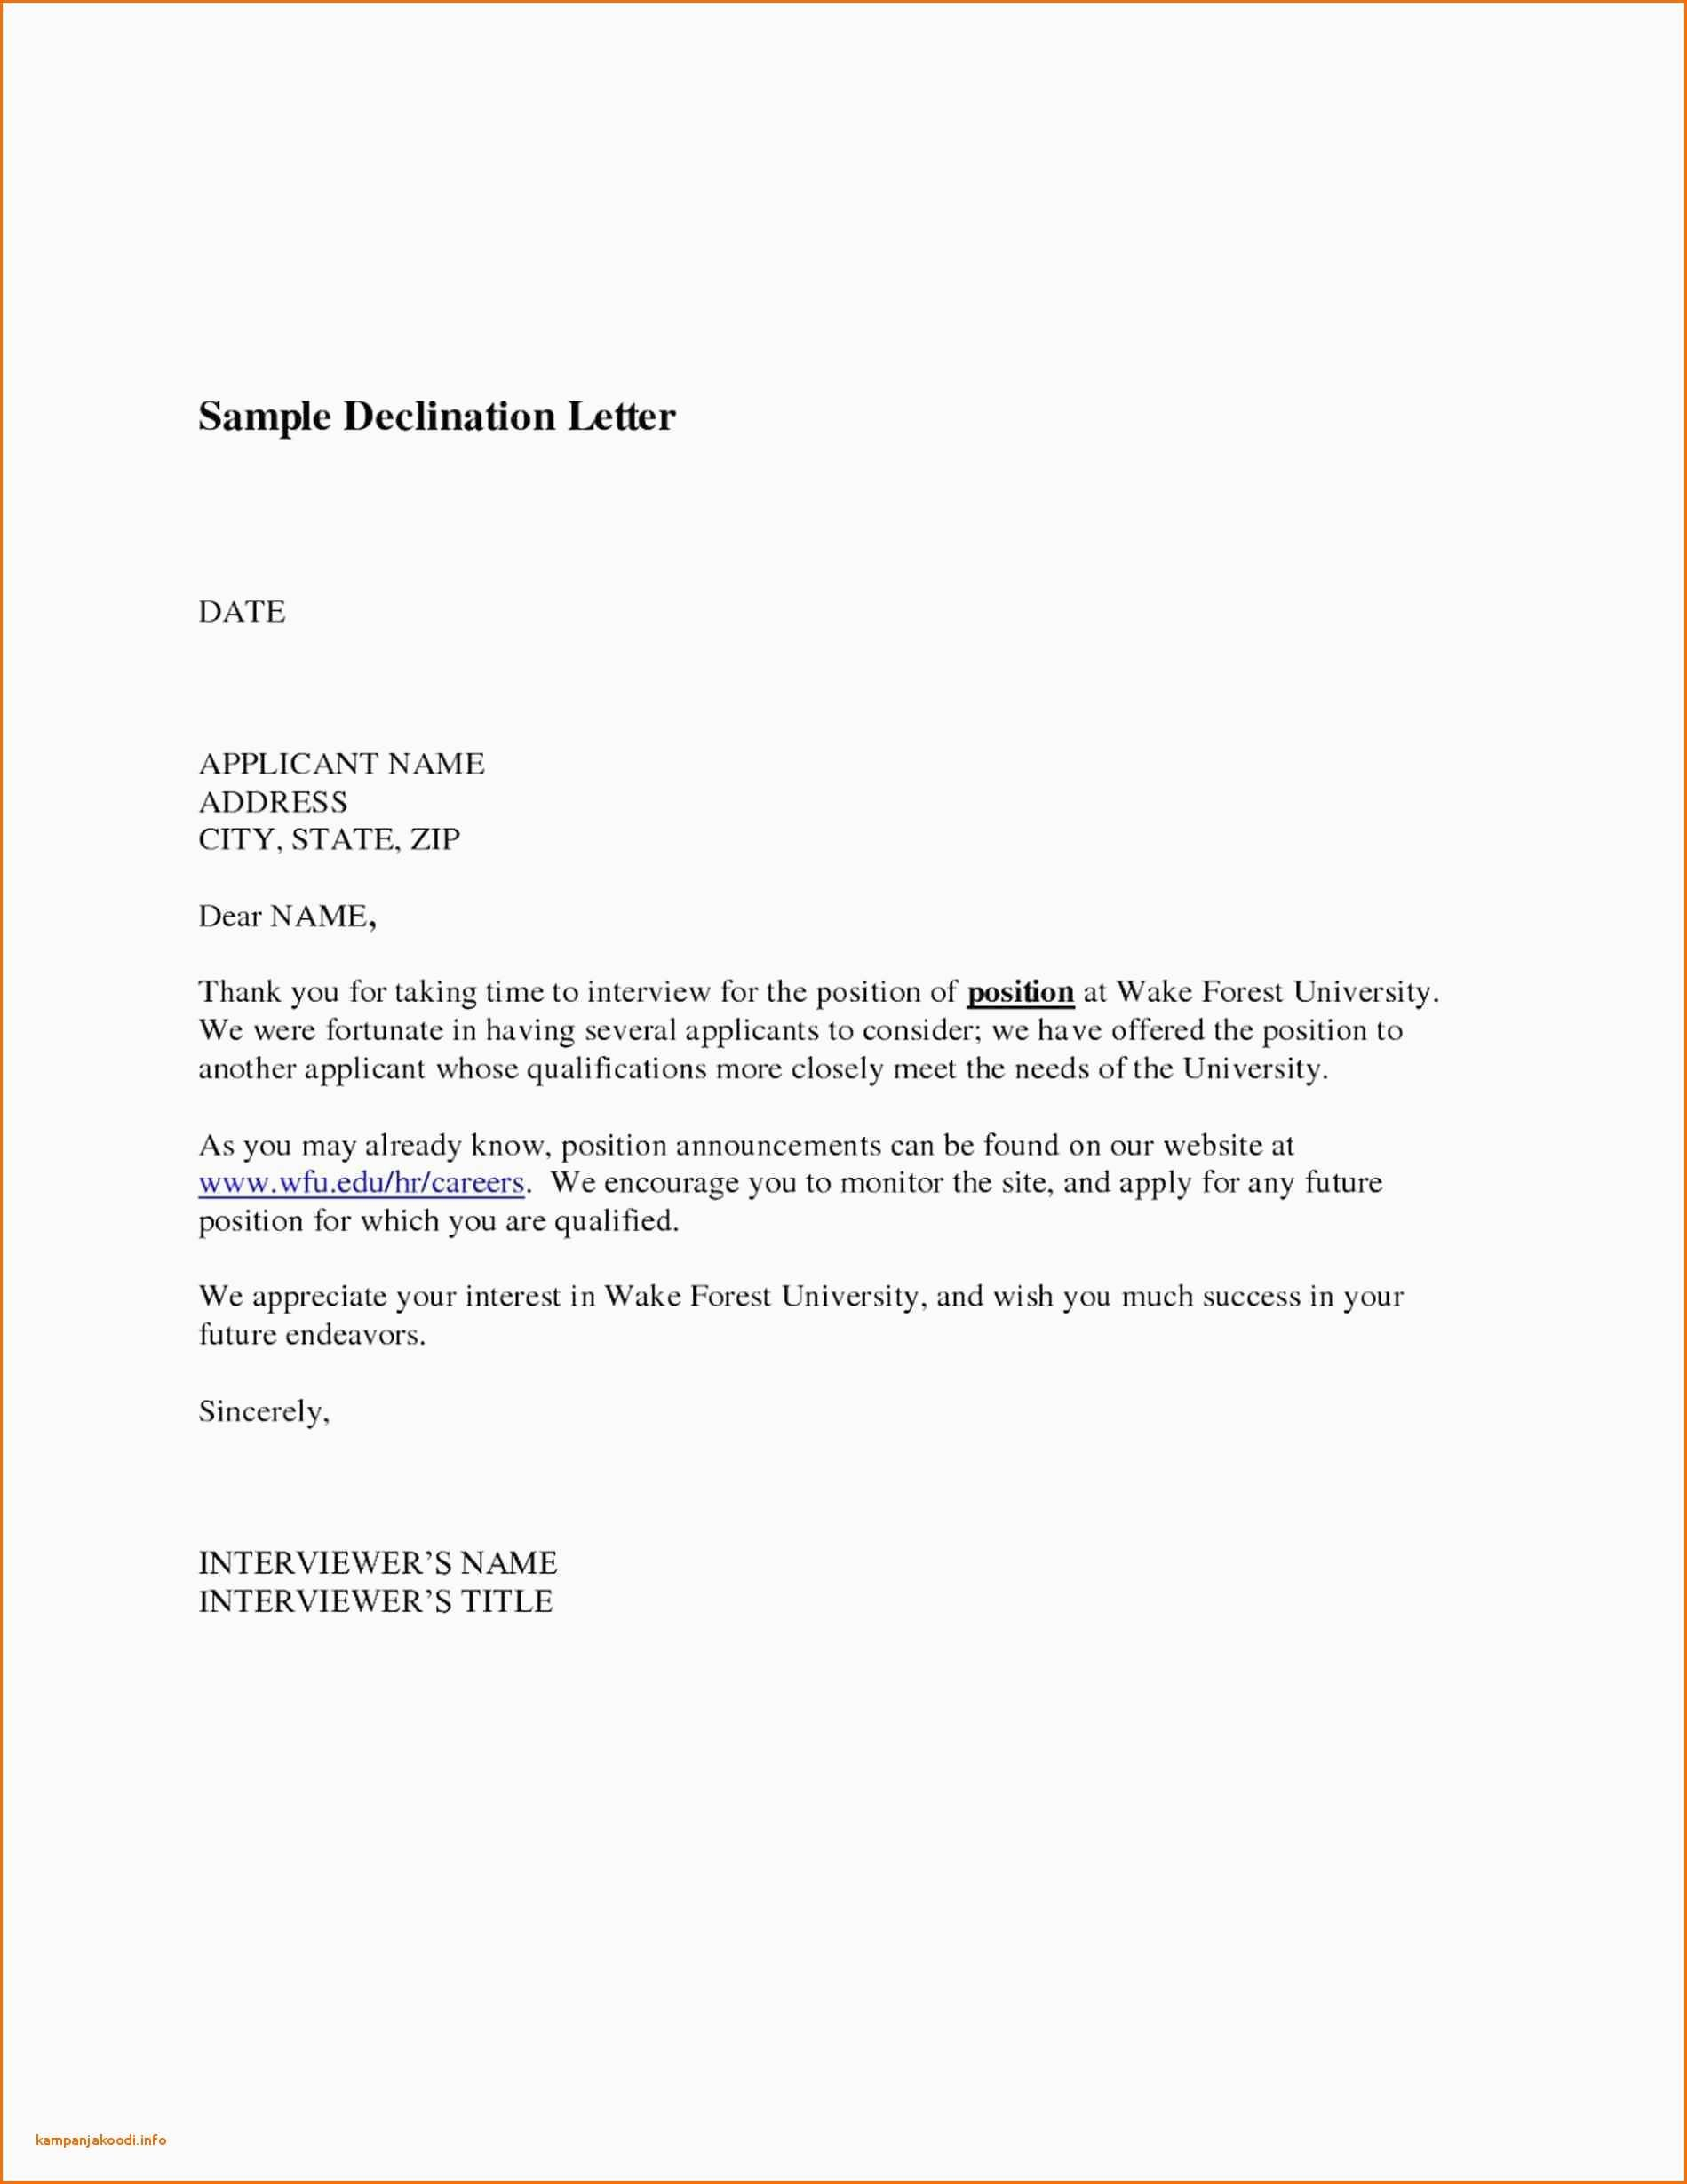 Resume ~ Incredible Cover Letter For Job Posting Photo With Internal Job Posting Template Word